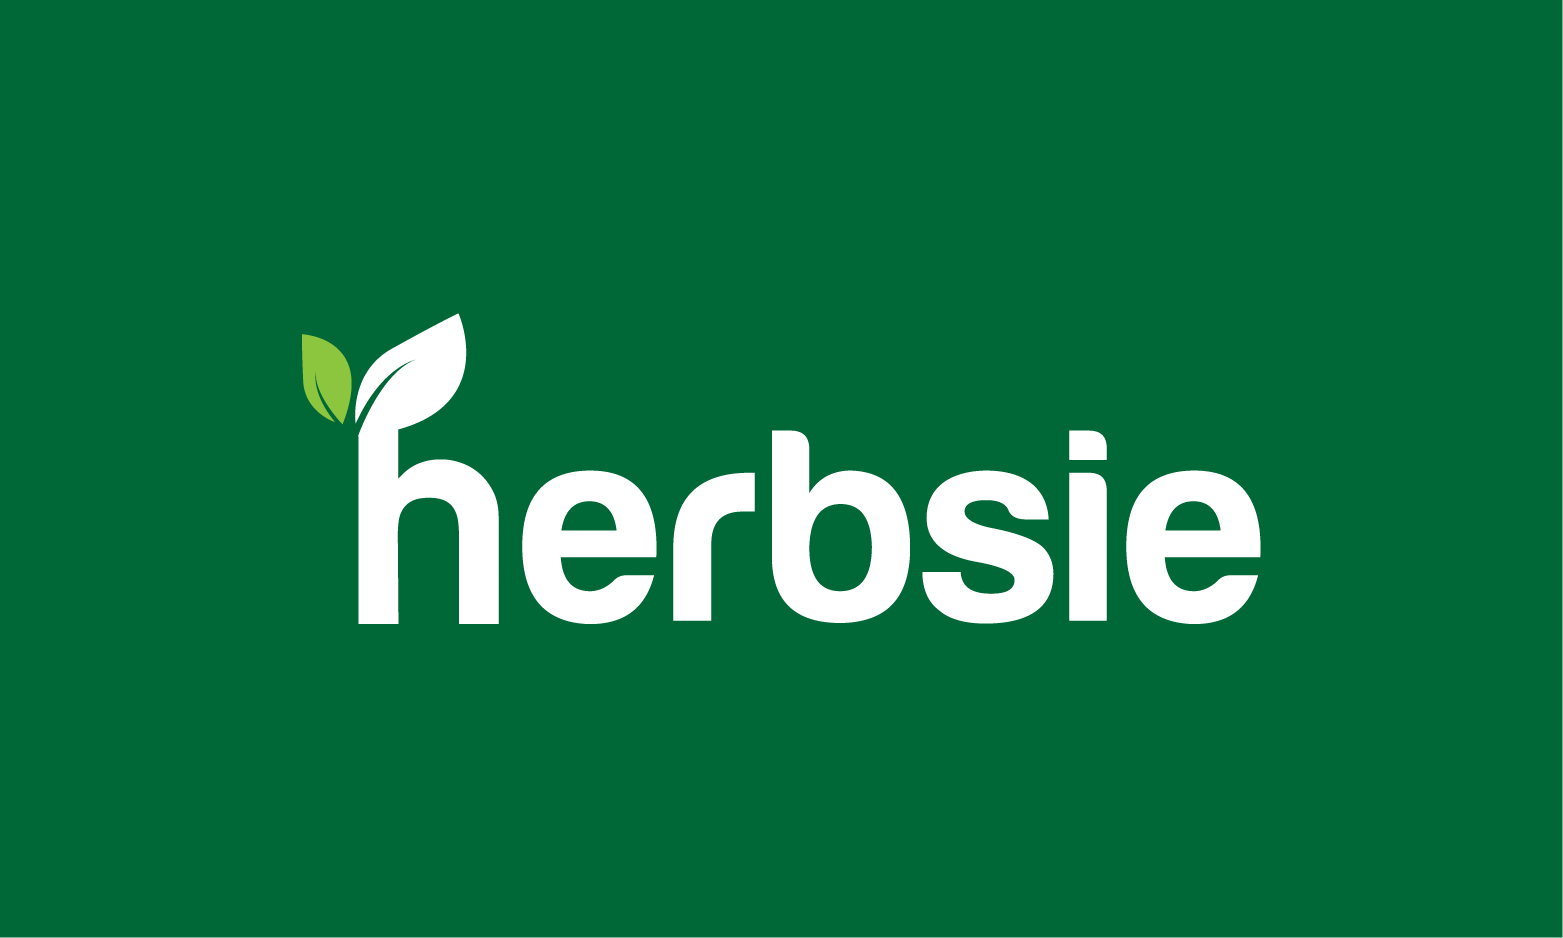 Herbsie.com - Creative brandable domain for sale